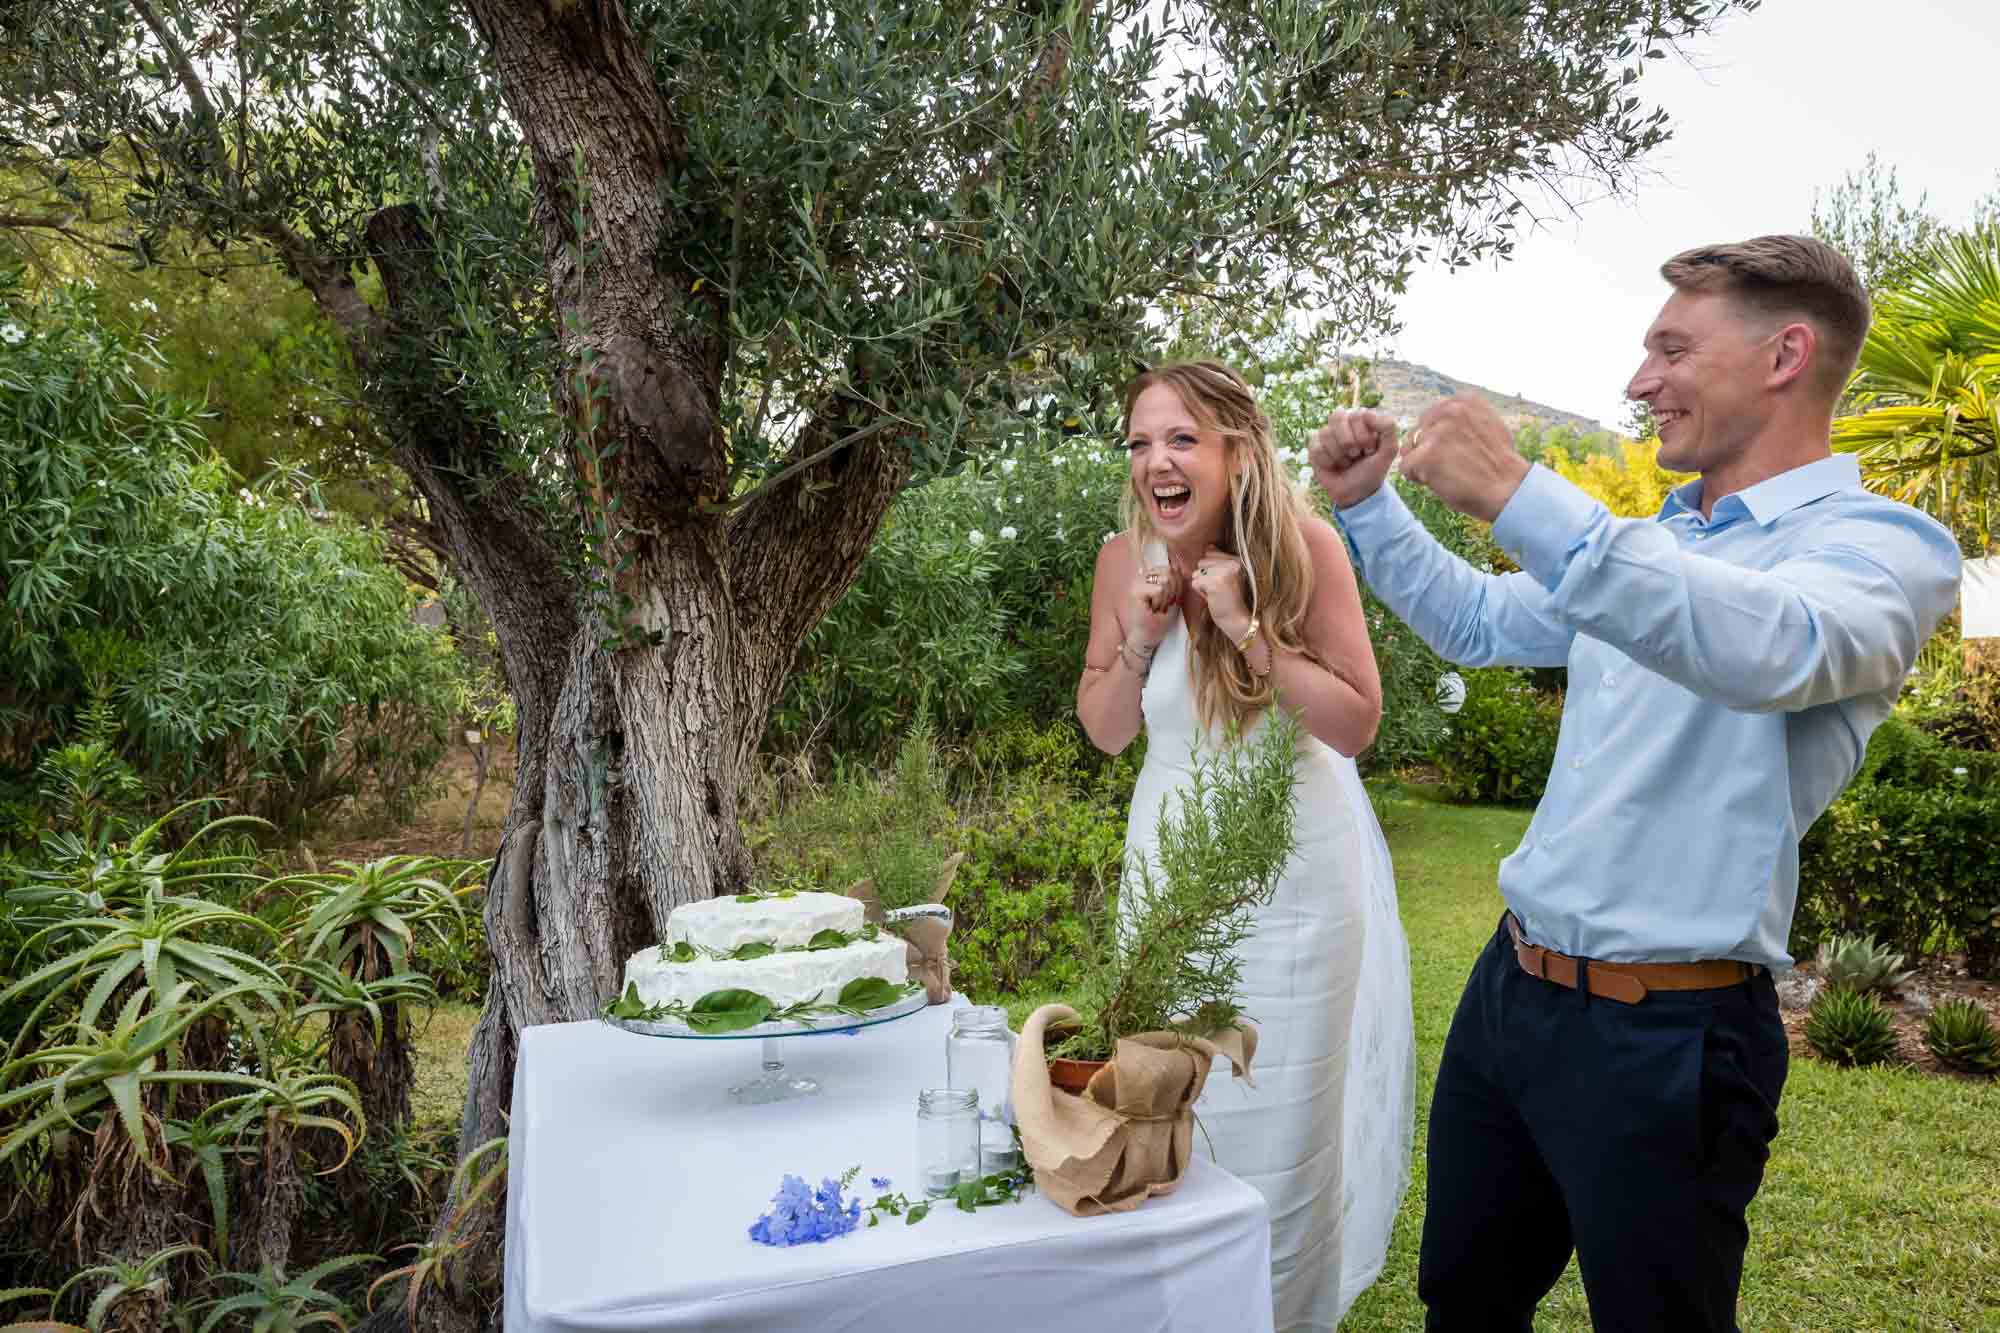 Cathy and Ben celebrate after cutting the wedding cake at their Mallorca finca wedding